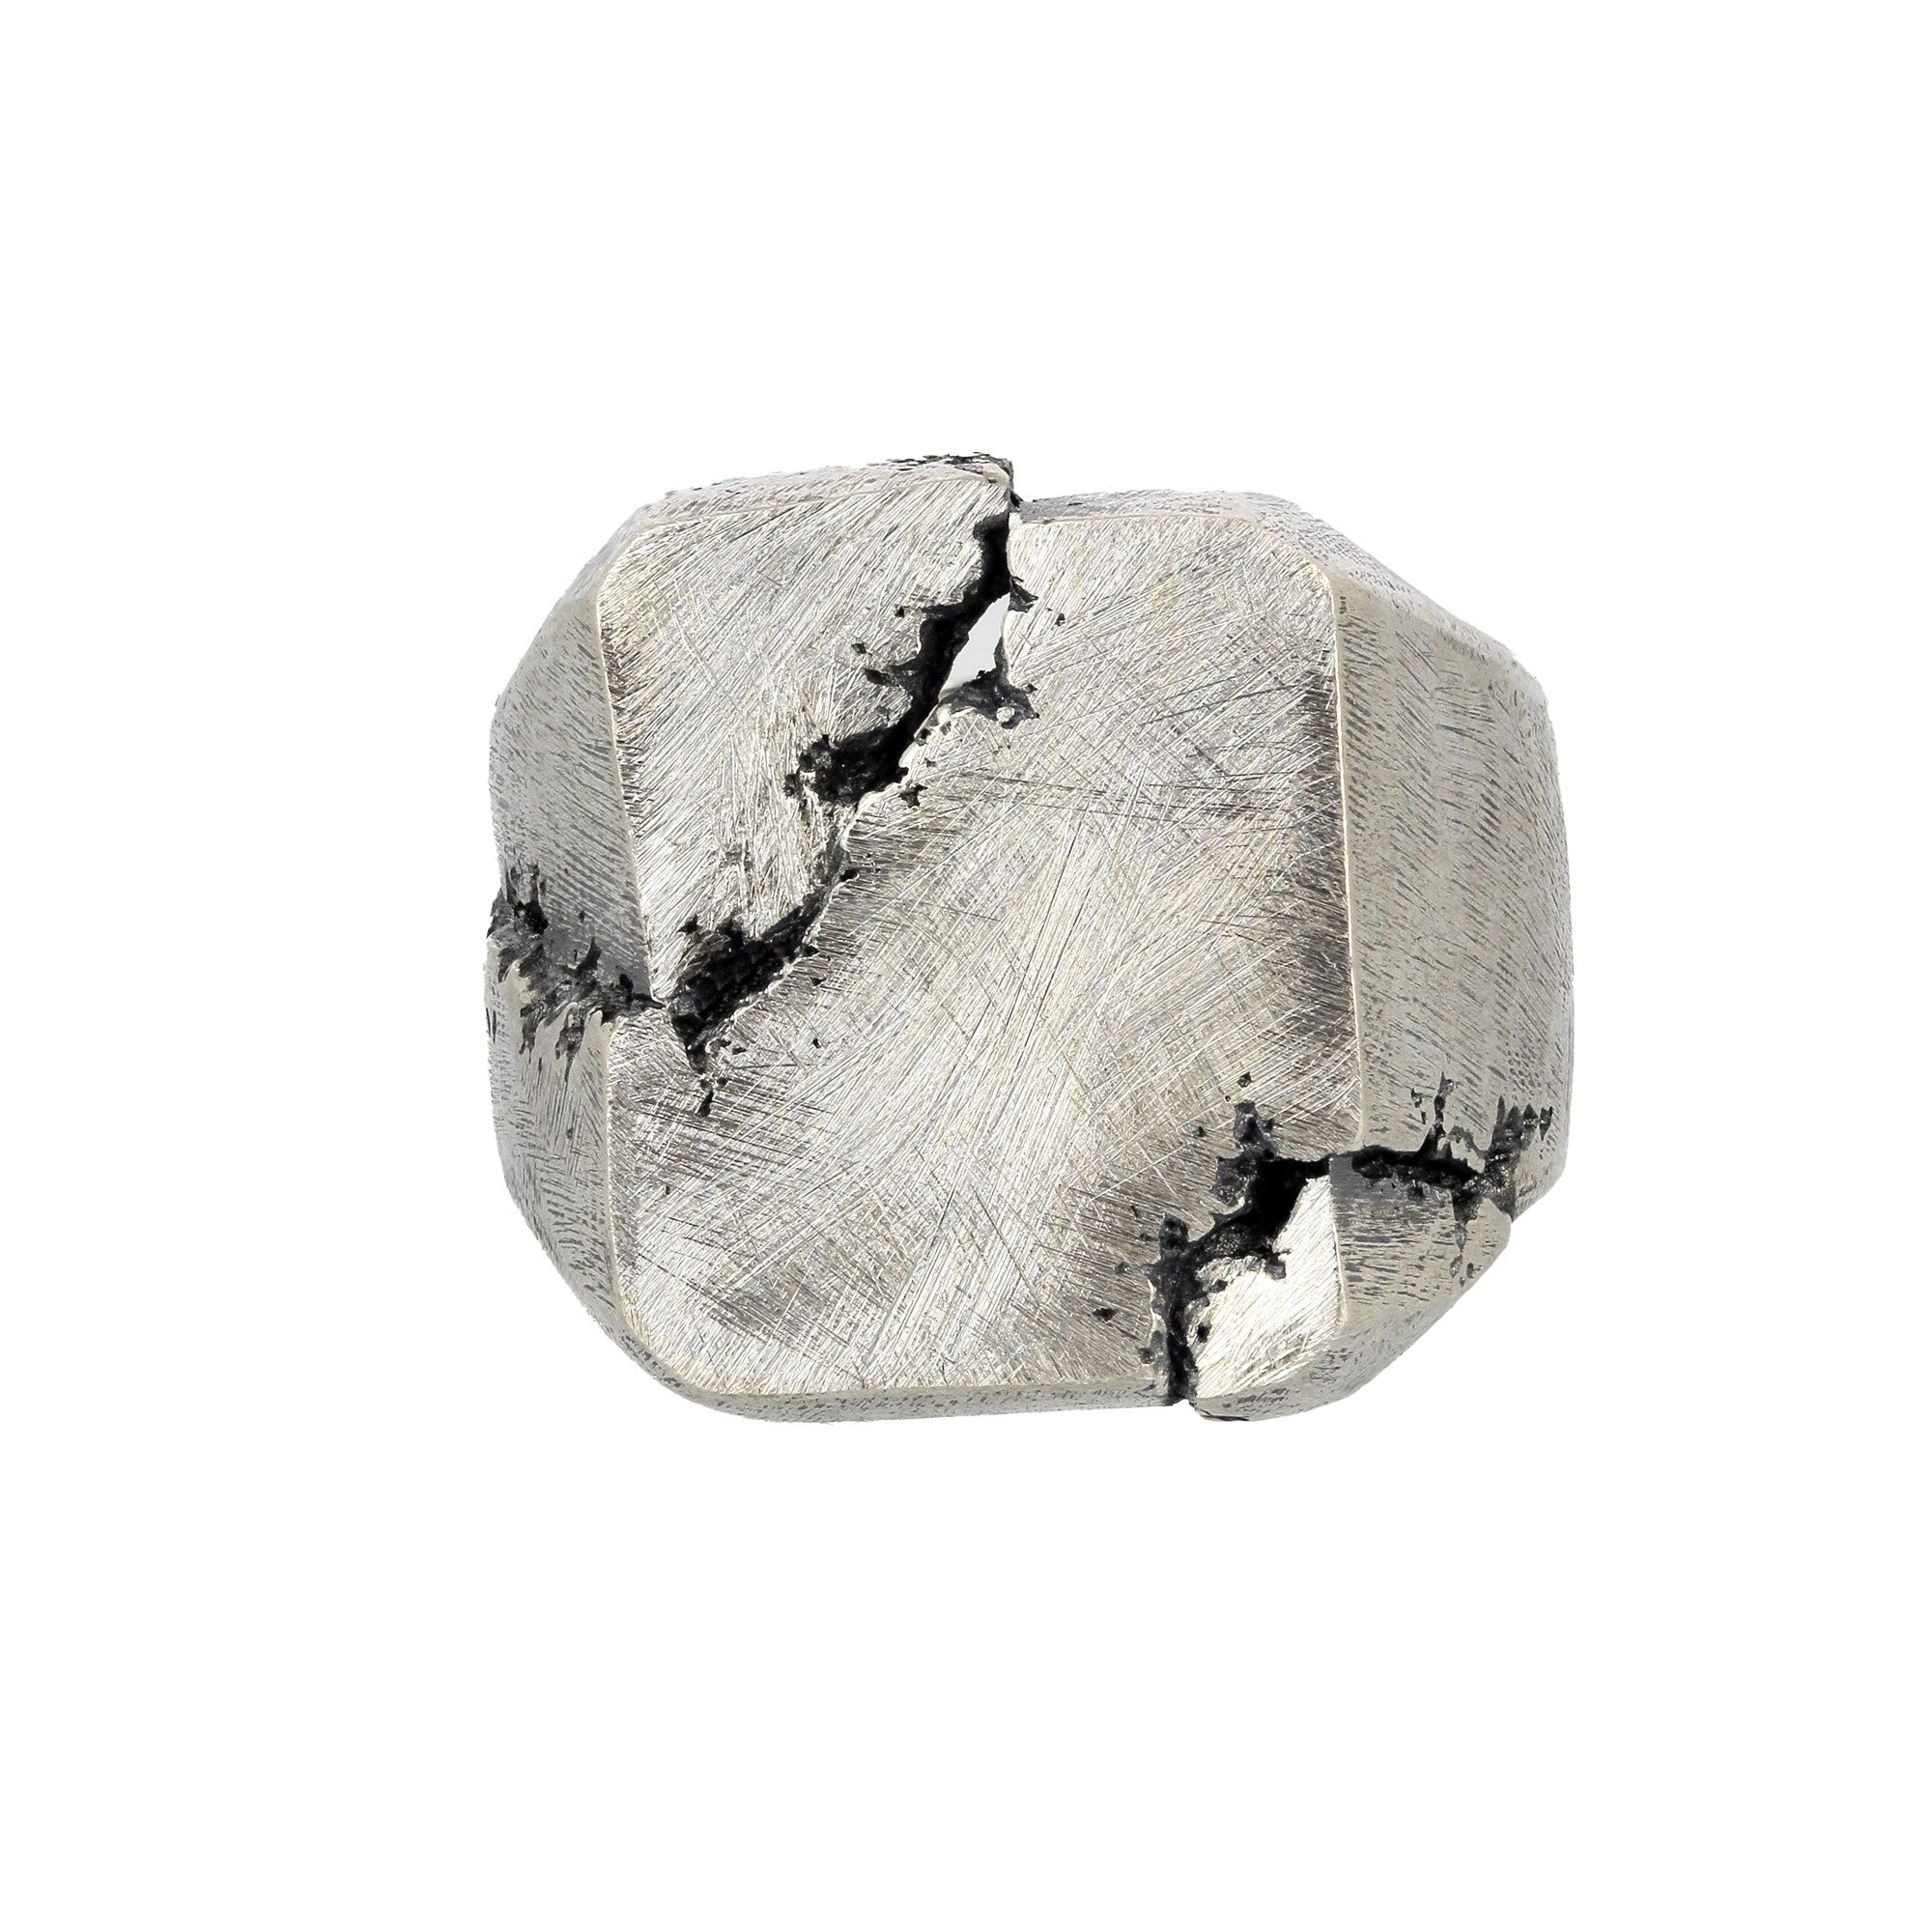 Fractured Signet Ring